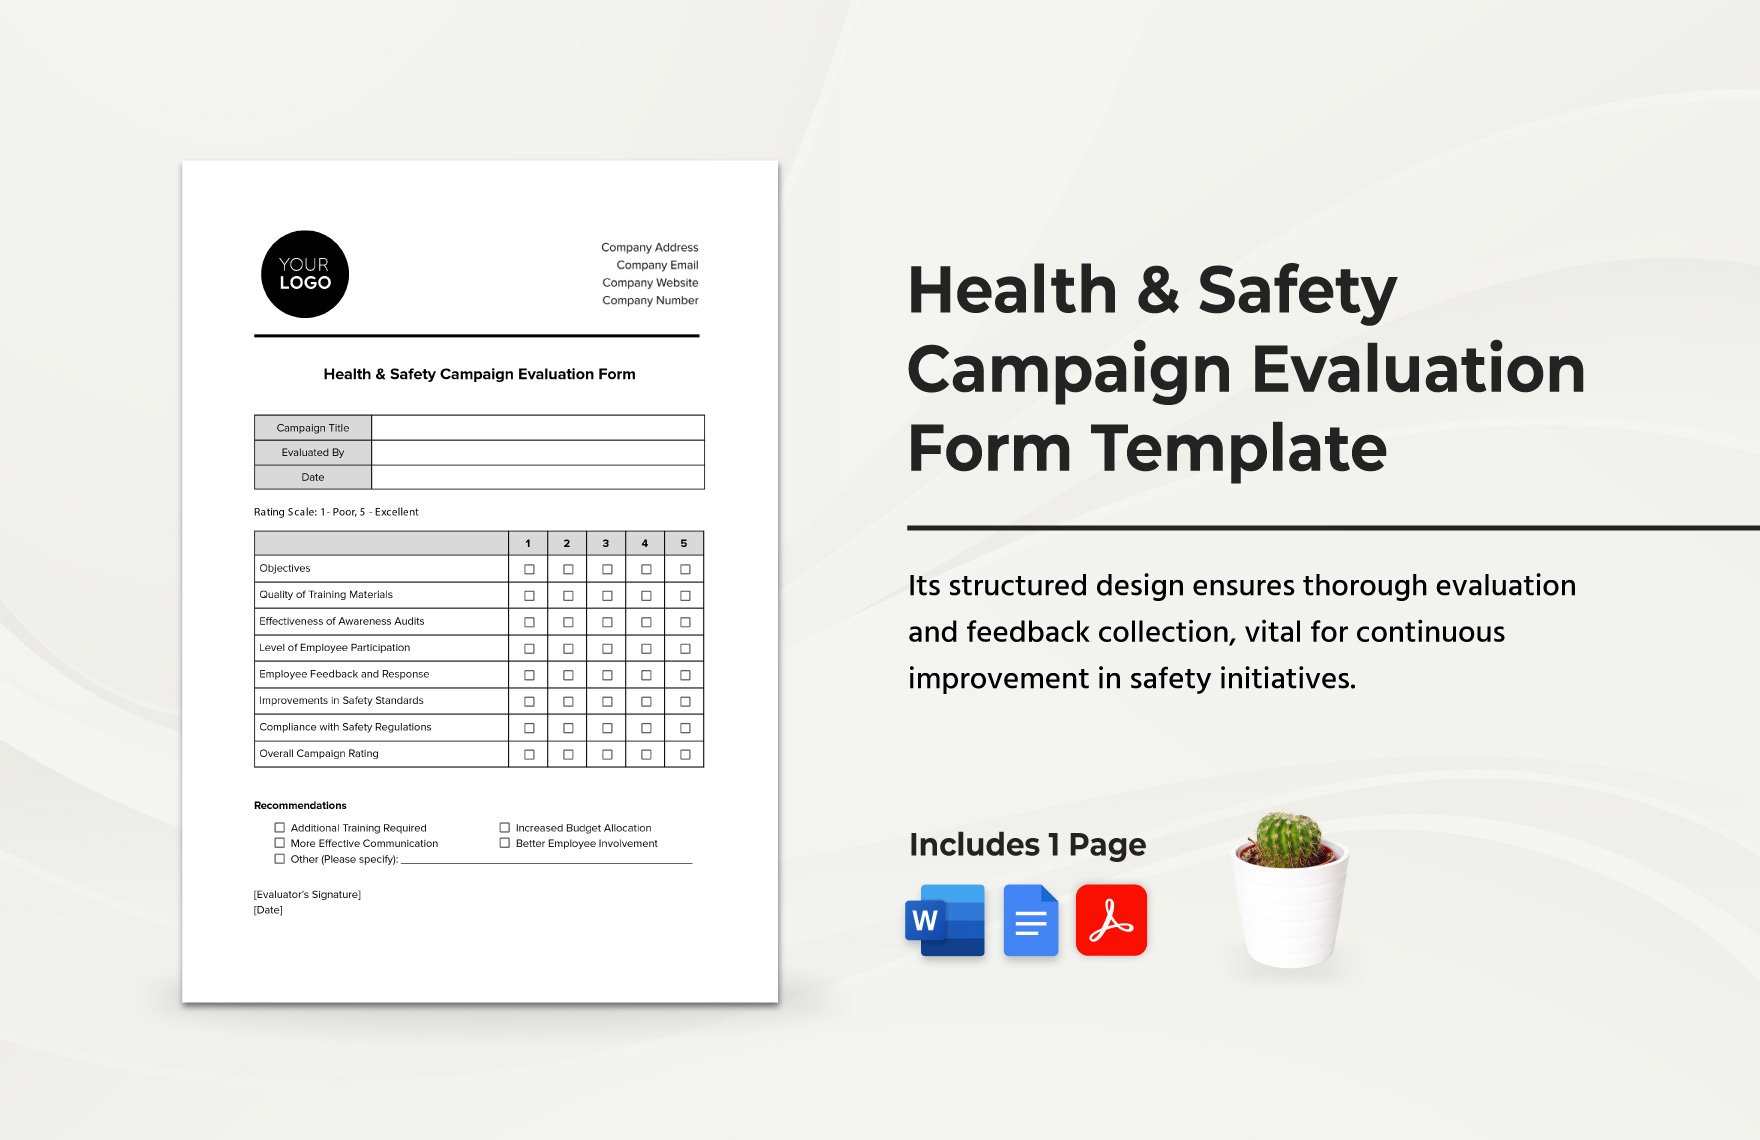 Health & Safety Campaign Evaluation Form Template